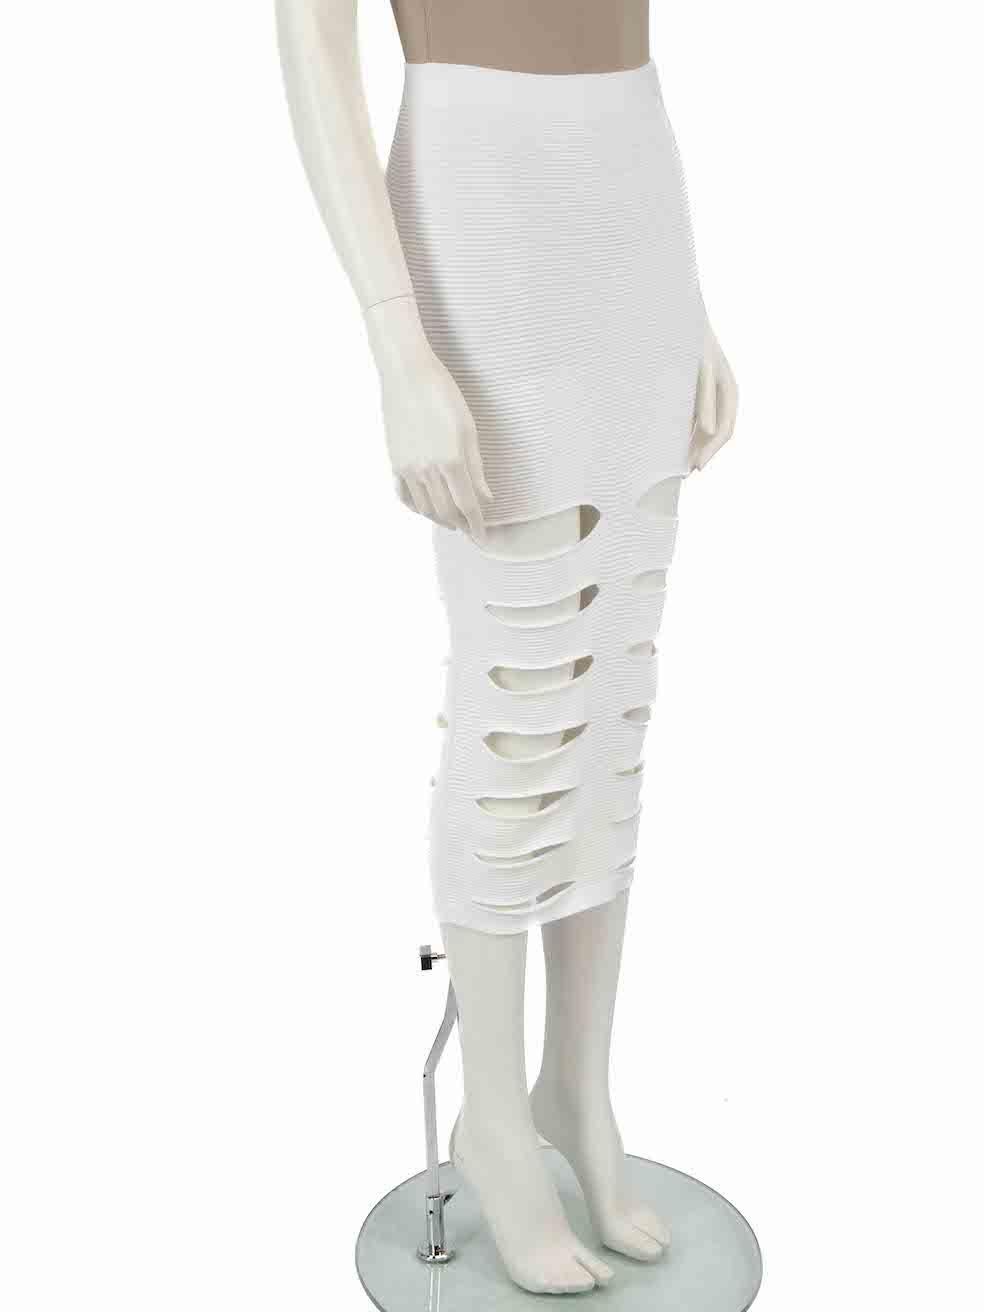 CONDITION is Never worn, with tags. No visible wear to skirt is evident on this new Cushine Et Ochs designer resale item.
 
 
 
 Details
 
 
 White
 
 Rayon
 
 Skirt
 
 Figure hugging fit
 
 Slashed detail
 
 Stretchy
 
 Midi
 
 
 
 
 
 Made in USA
